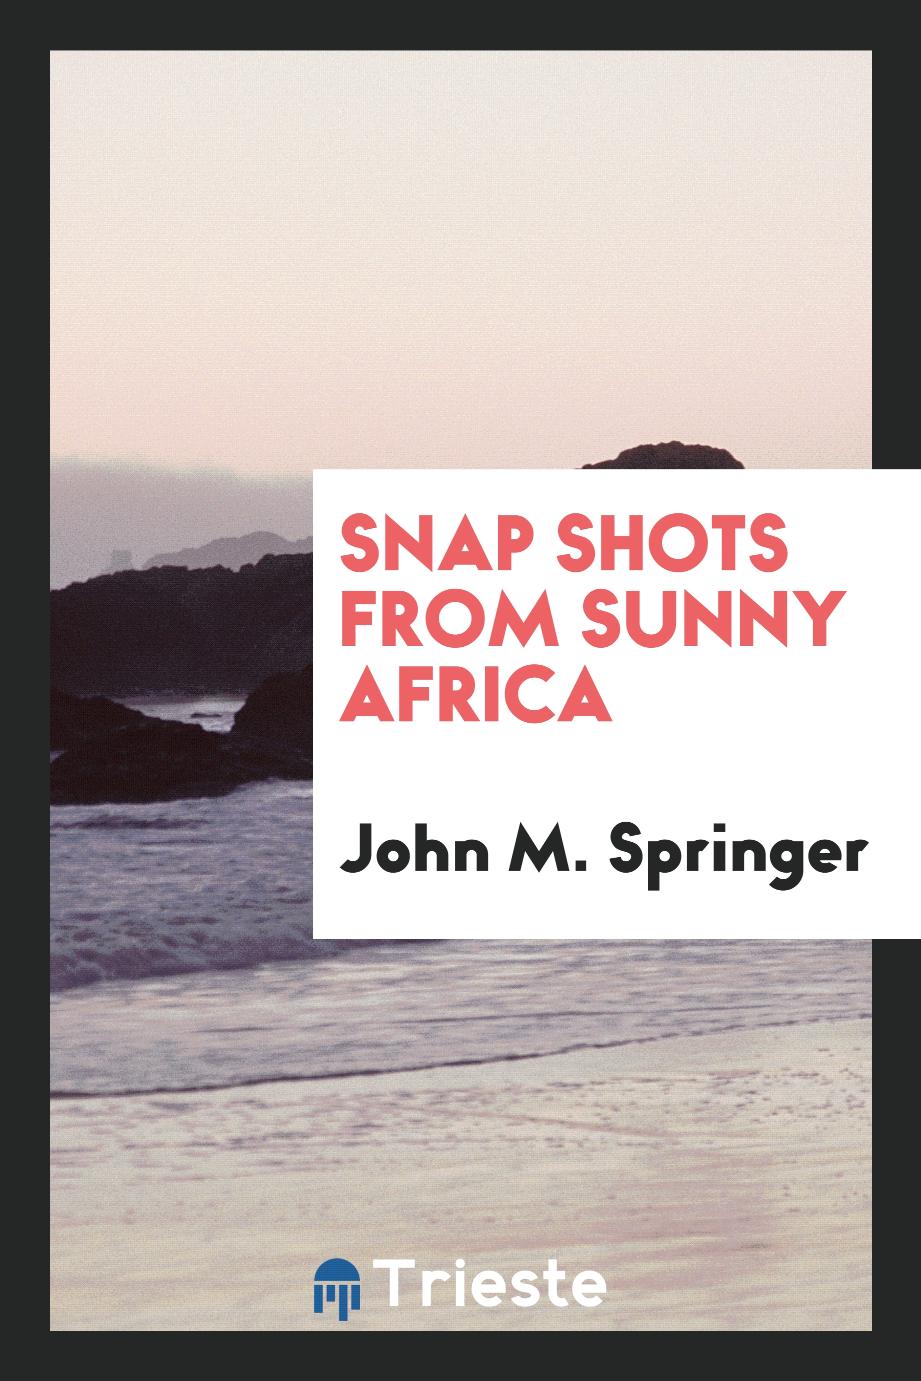 Snap shots from sunny Africa